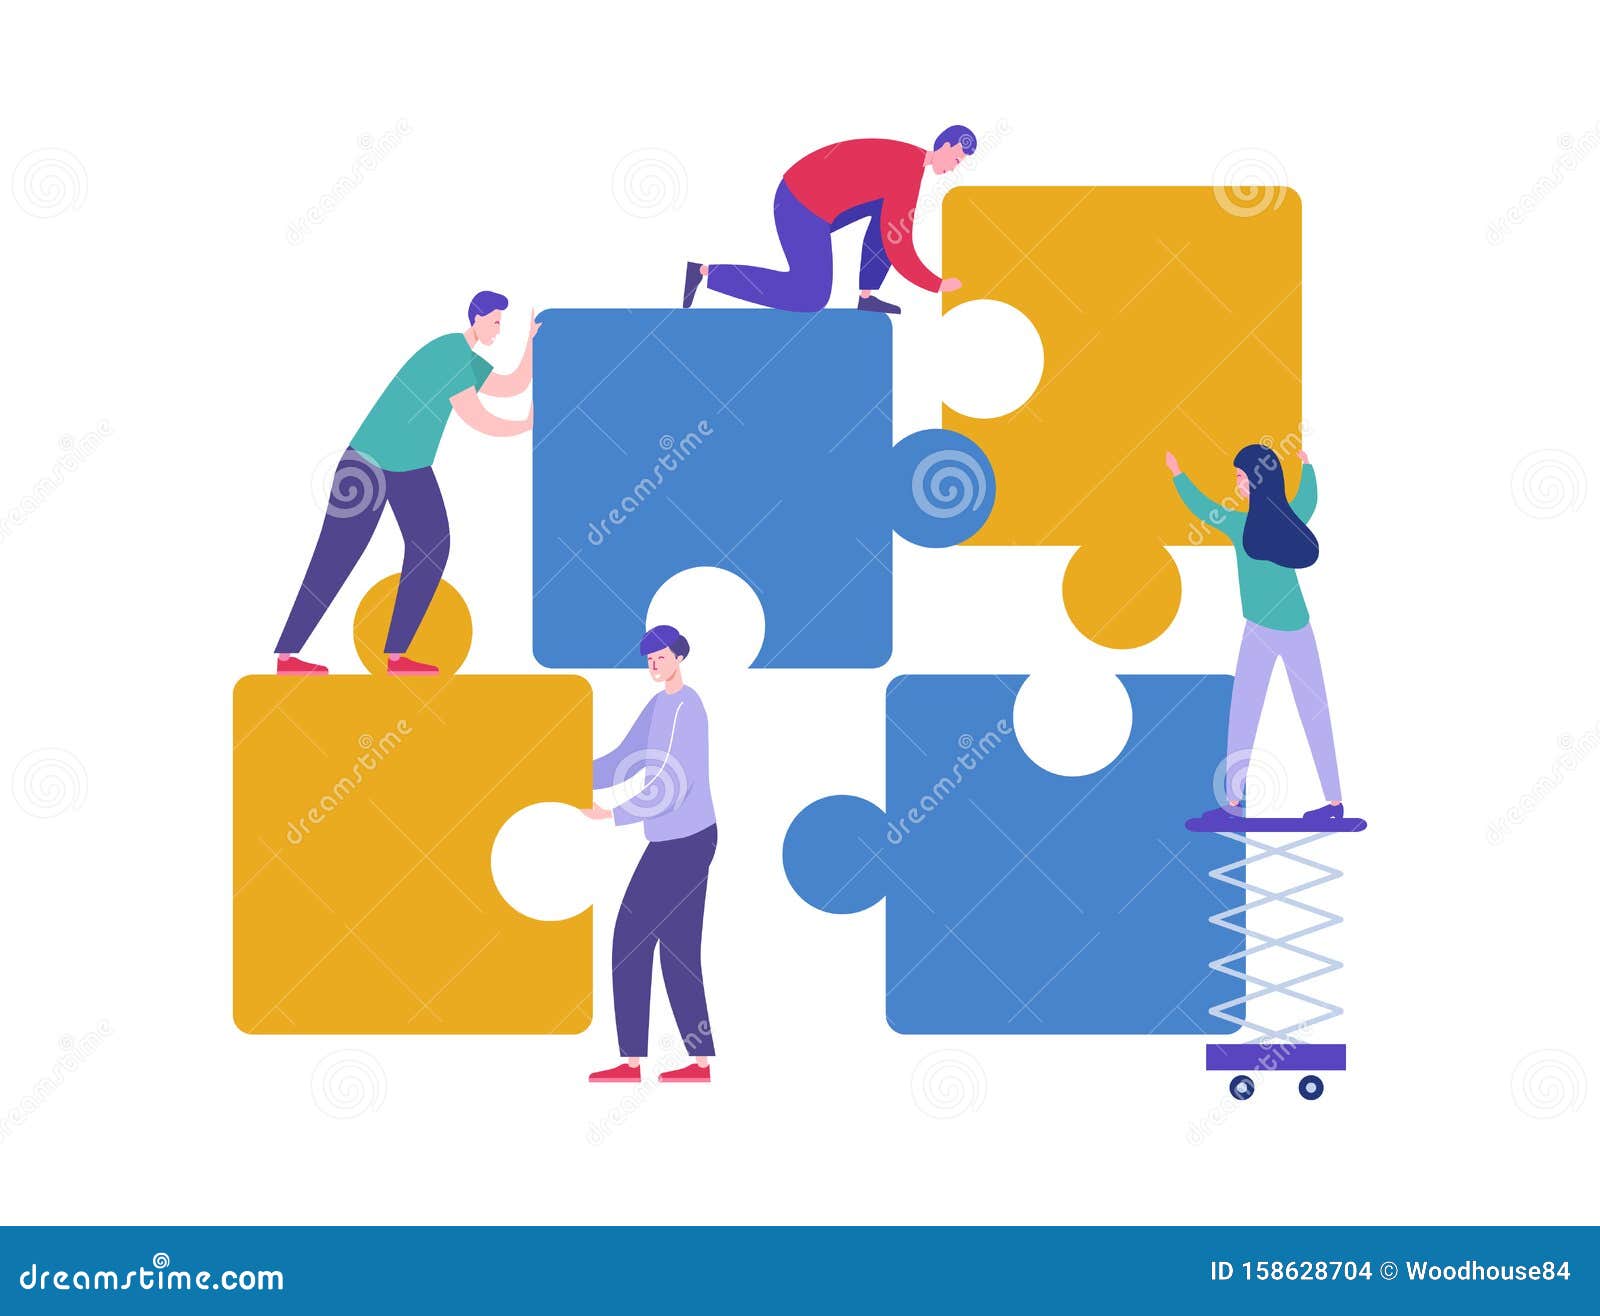 business teamwork concept. tiny characters connecting puzzle pieces. creative solutions, collaboration and partnership